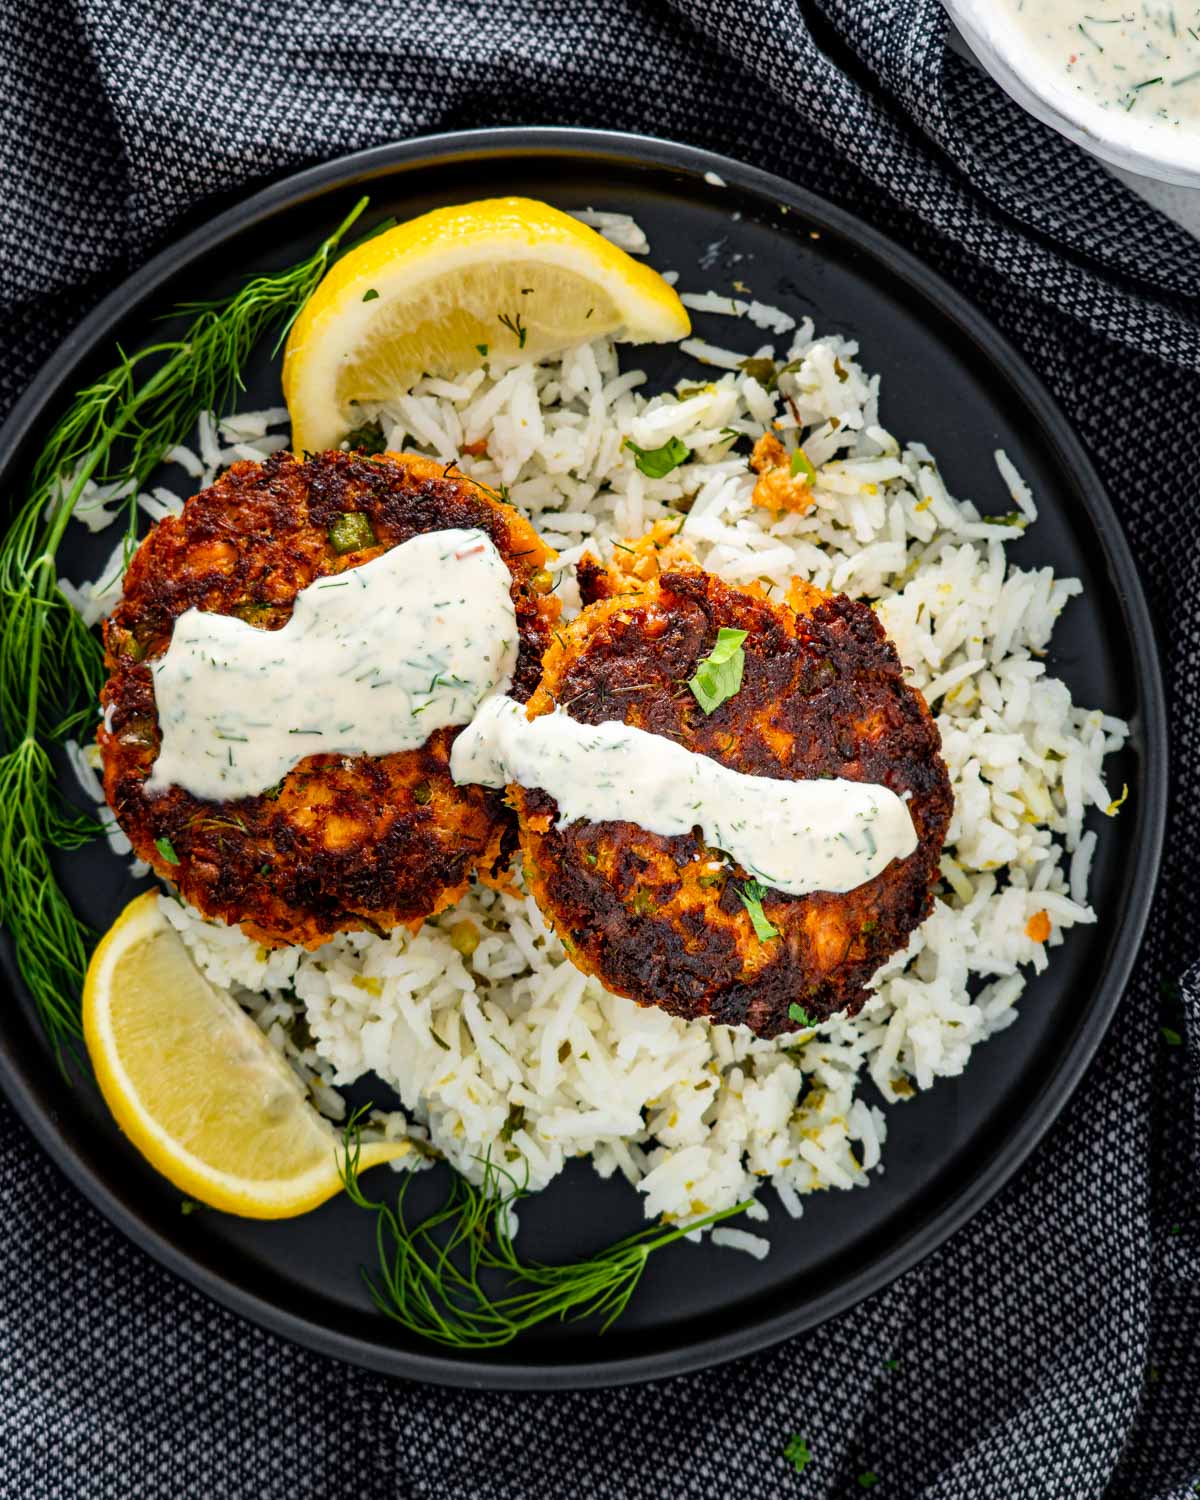 two salmon patties with dill sauce over a bed of rice.